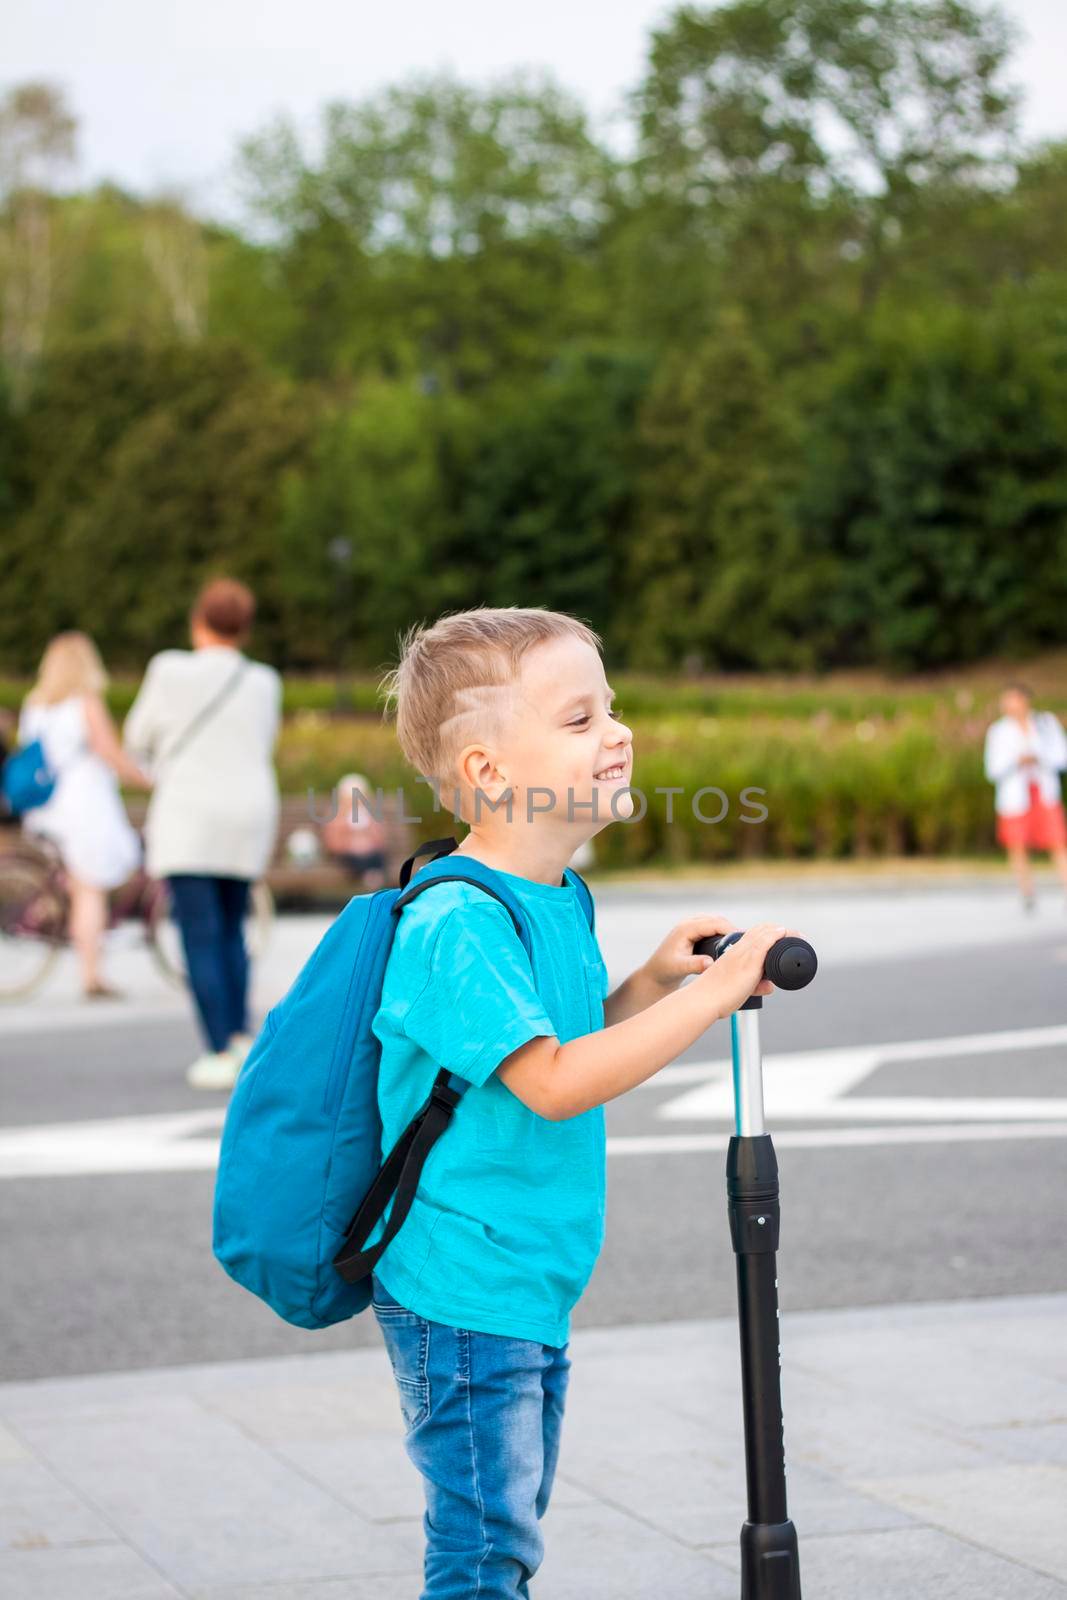 A boy on a scooter along the embankment of the city. Journey. Backpack on the back. The face expresses natural joyful emotions. Not staged photos from life.